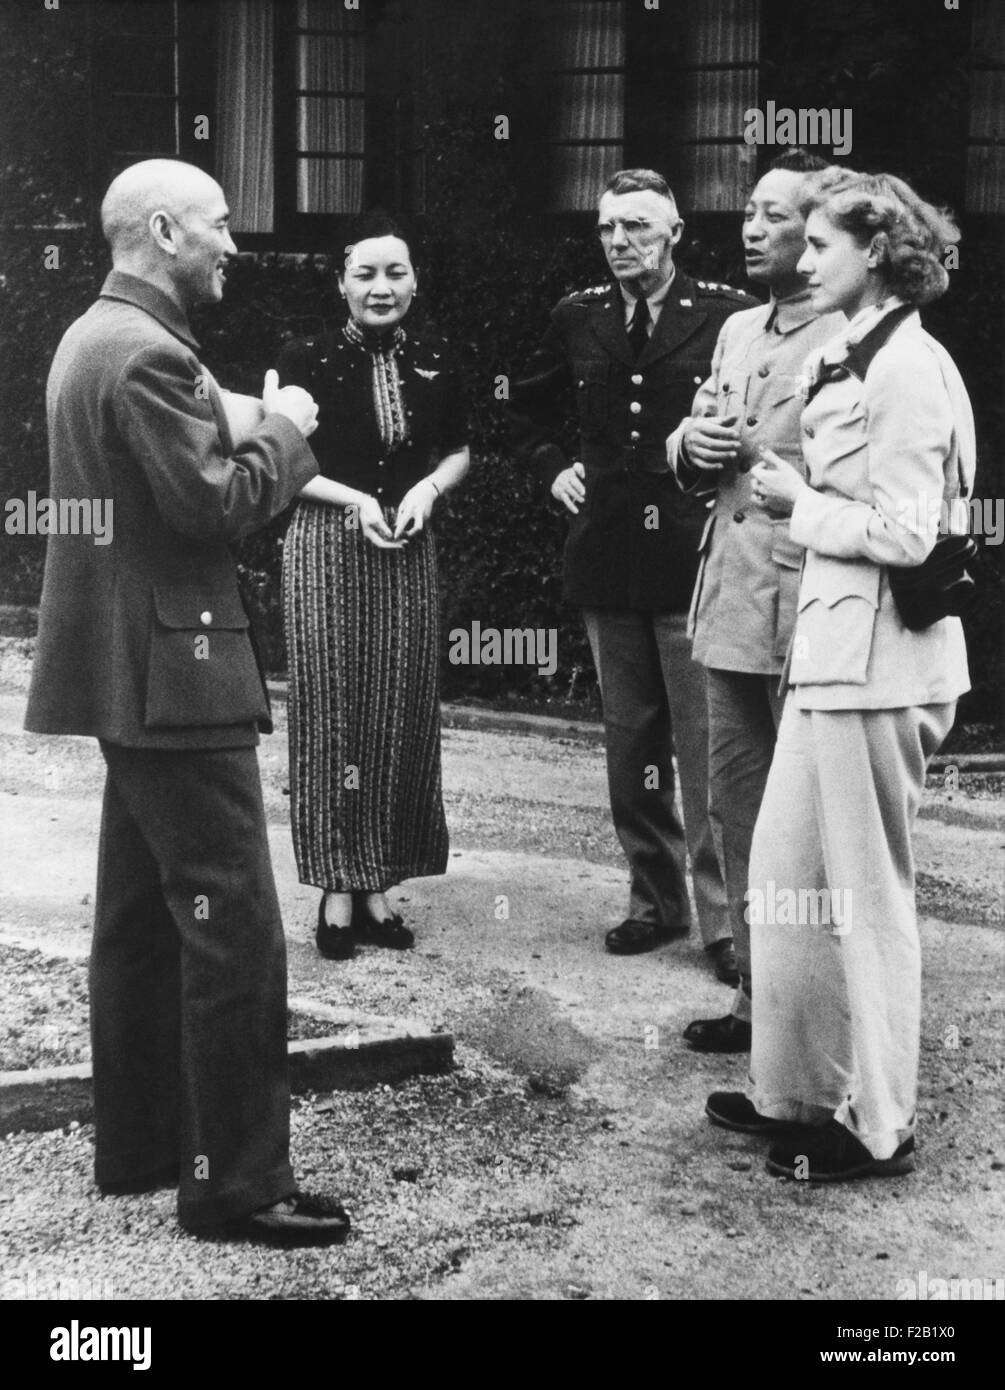 Chinese leader and Americans together after the after the Doolittle Raid on Japan. April 19, 1942. L-R: Chiang Kai-shek, Mme. Chiang Kai-shek (Soong May-ling), U.S. Gen. Joseph Stilwell, unidentified Chinese officer, and Clare Booth Luce with Chiang Kai-shek (CSU 2015 8 577) Stock Photo